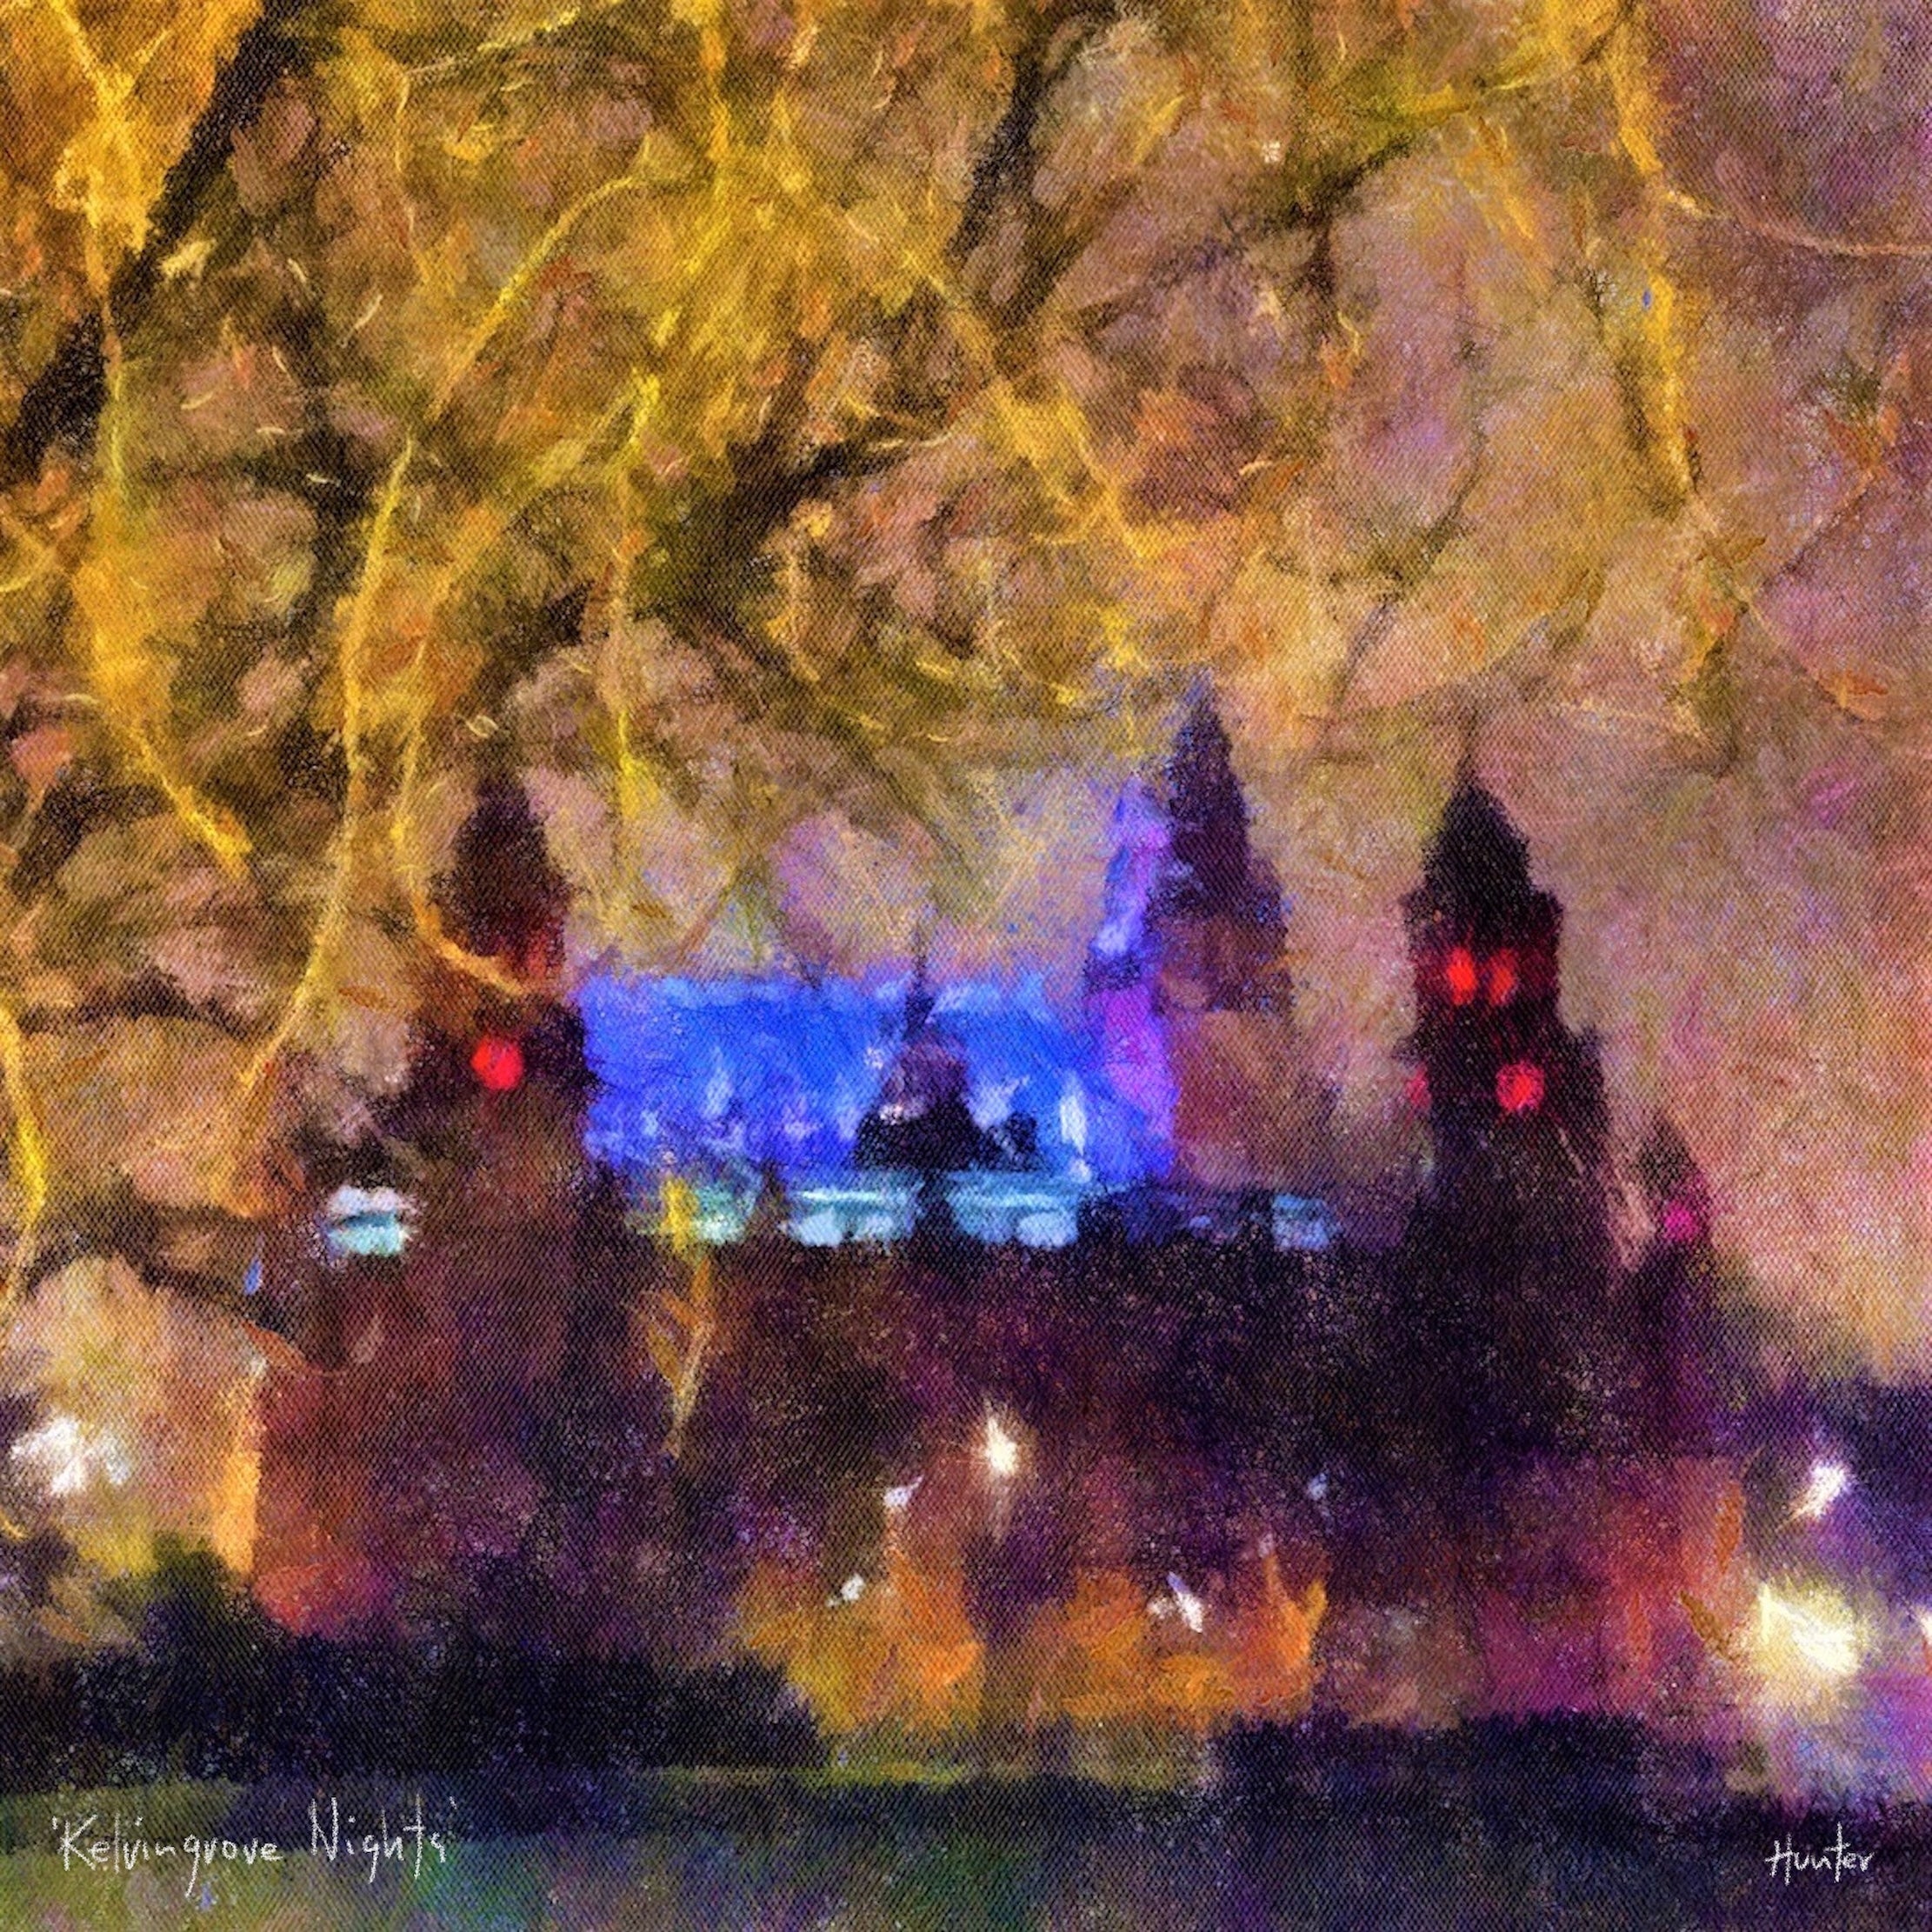 Kelvingrove Nights | Scotland In Your Pocket Art Print-Scotland In Your Pocket Framed Prints-Edinburgh & Glasgow Art Gallery-Paintings, Prints, Homeware, Art Gifts From Scotland By Scottish Artist Kevin Hunter